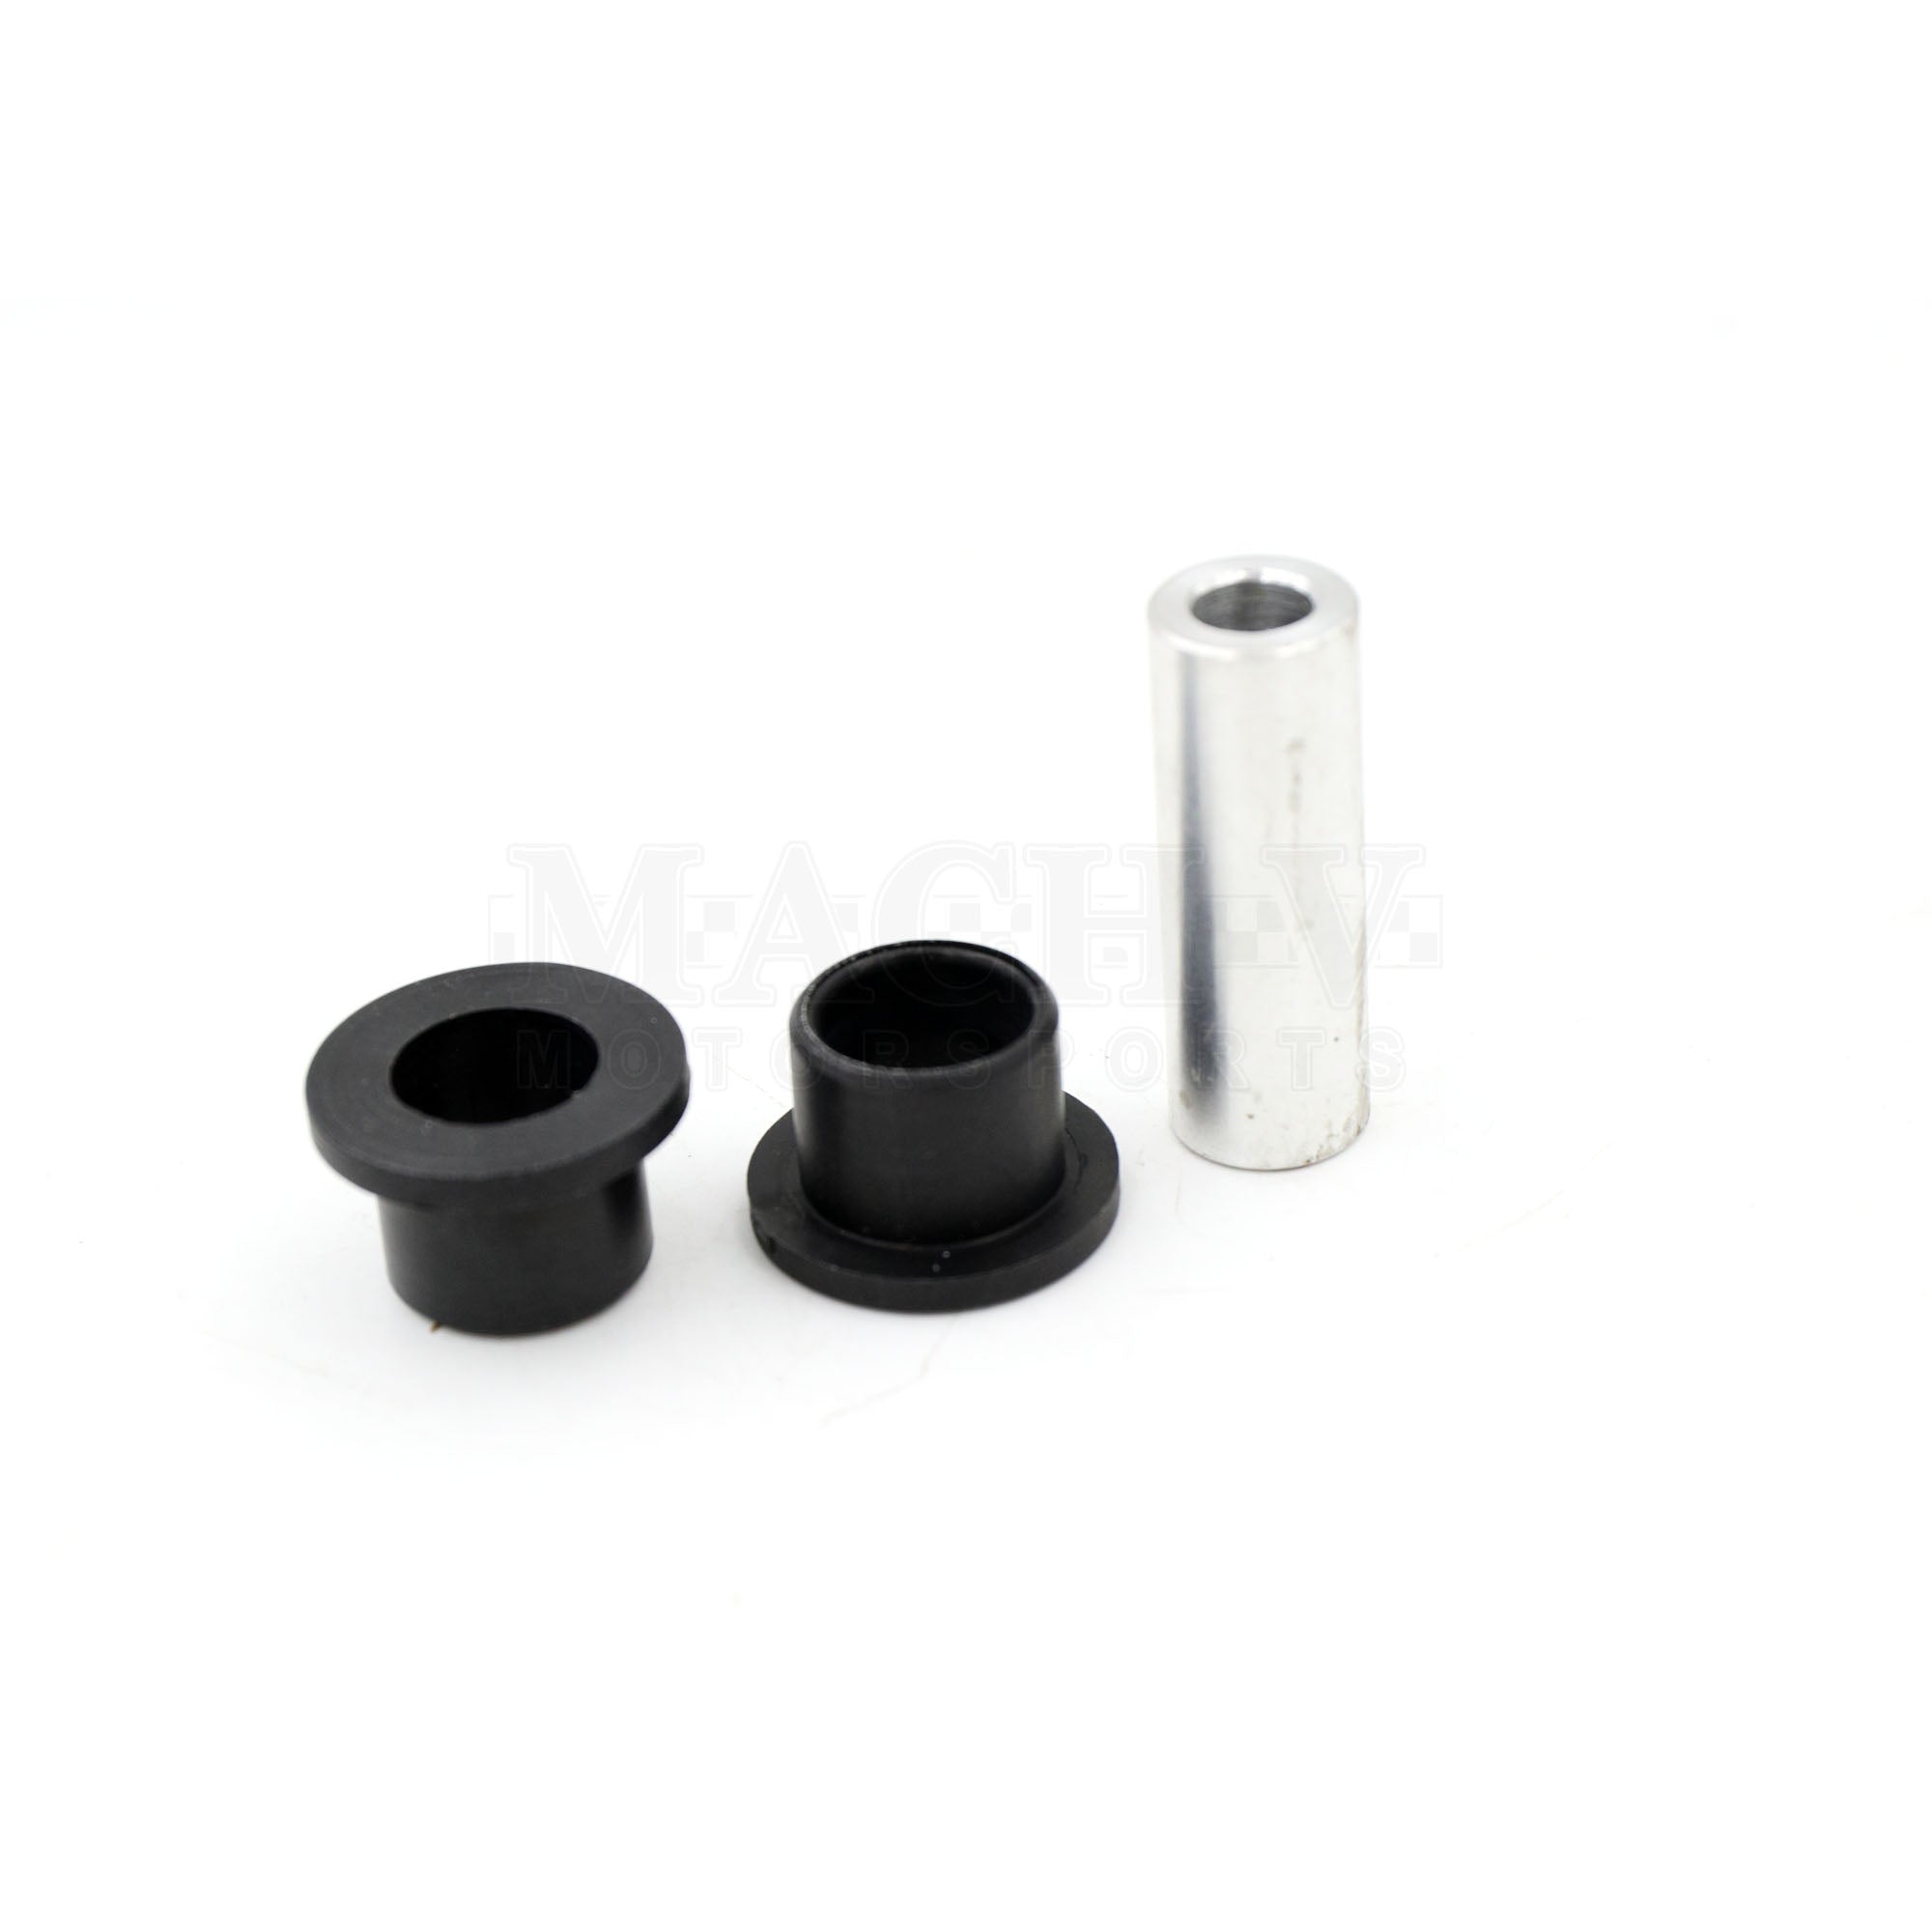 Turn In Concepts 6MT Lever Pivot Bushings